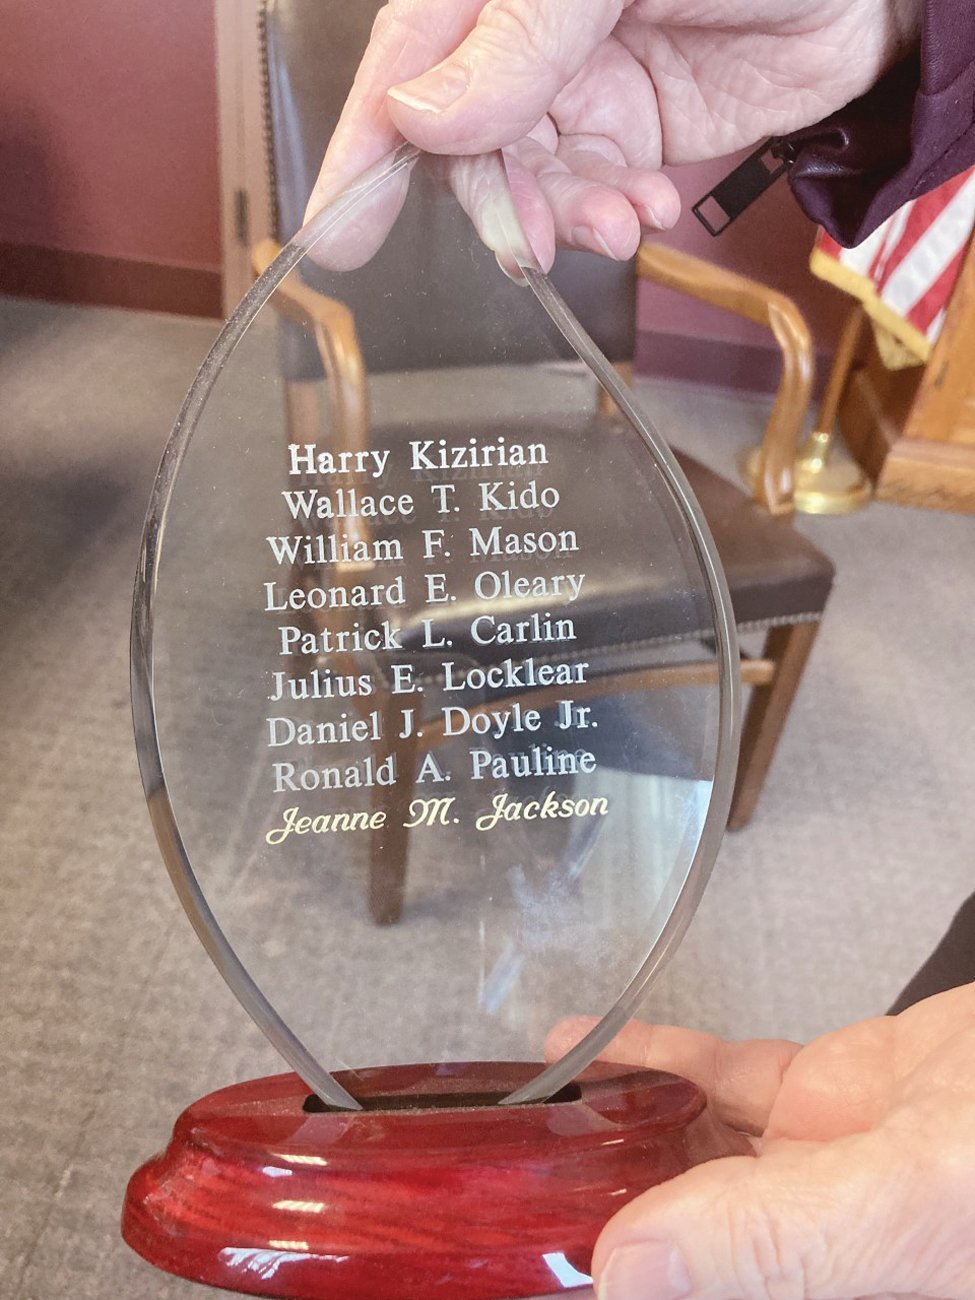 PRIOR POSTMASTERS: When Jackson became Providence Postmaster in 2019, she received an award listing all the prior postmasters who held her position while she had been part of the Postal Service. At the bottom, Jackson’s name was added in gold lettering.